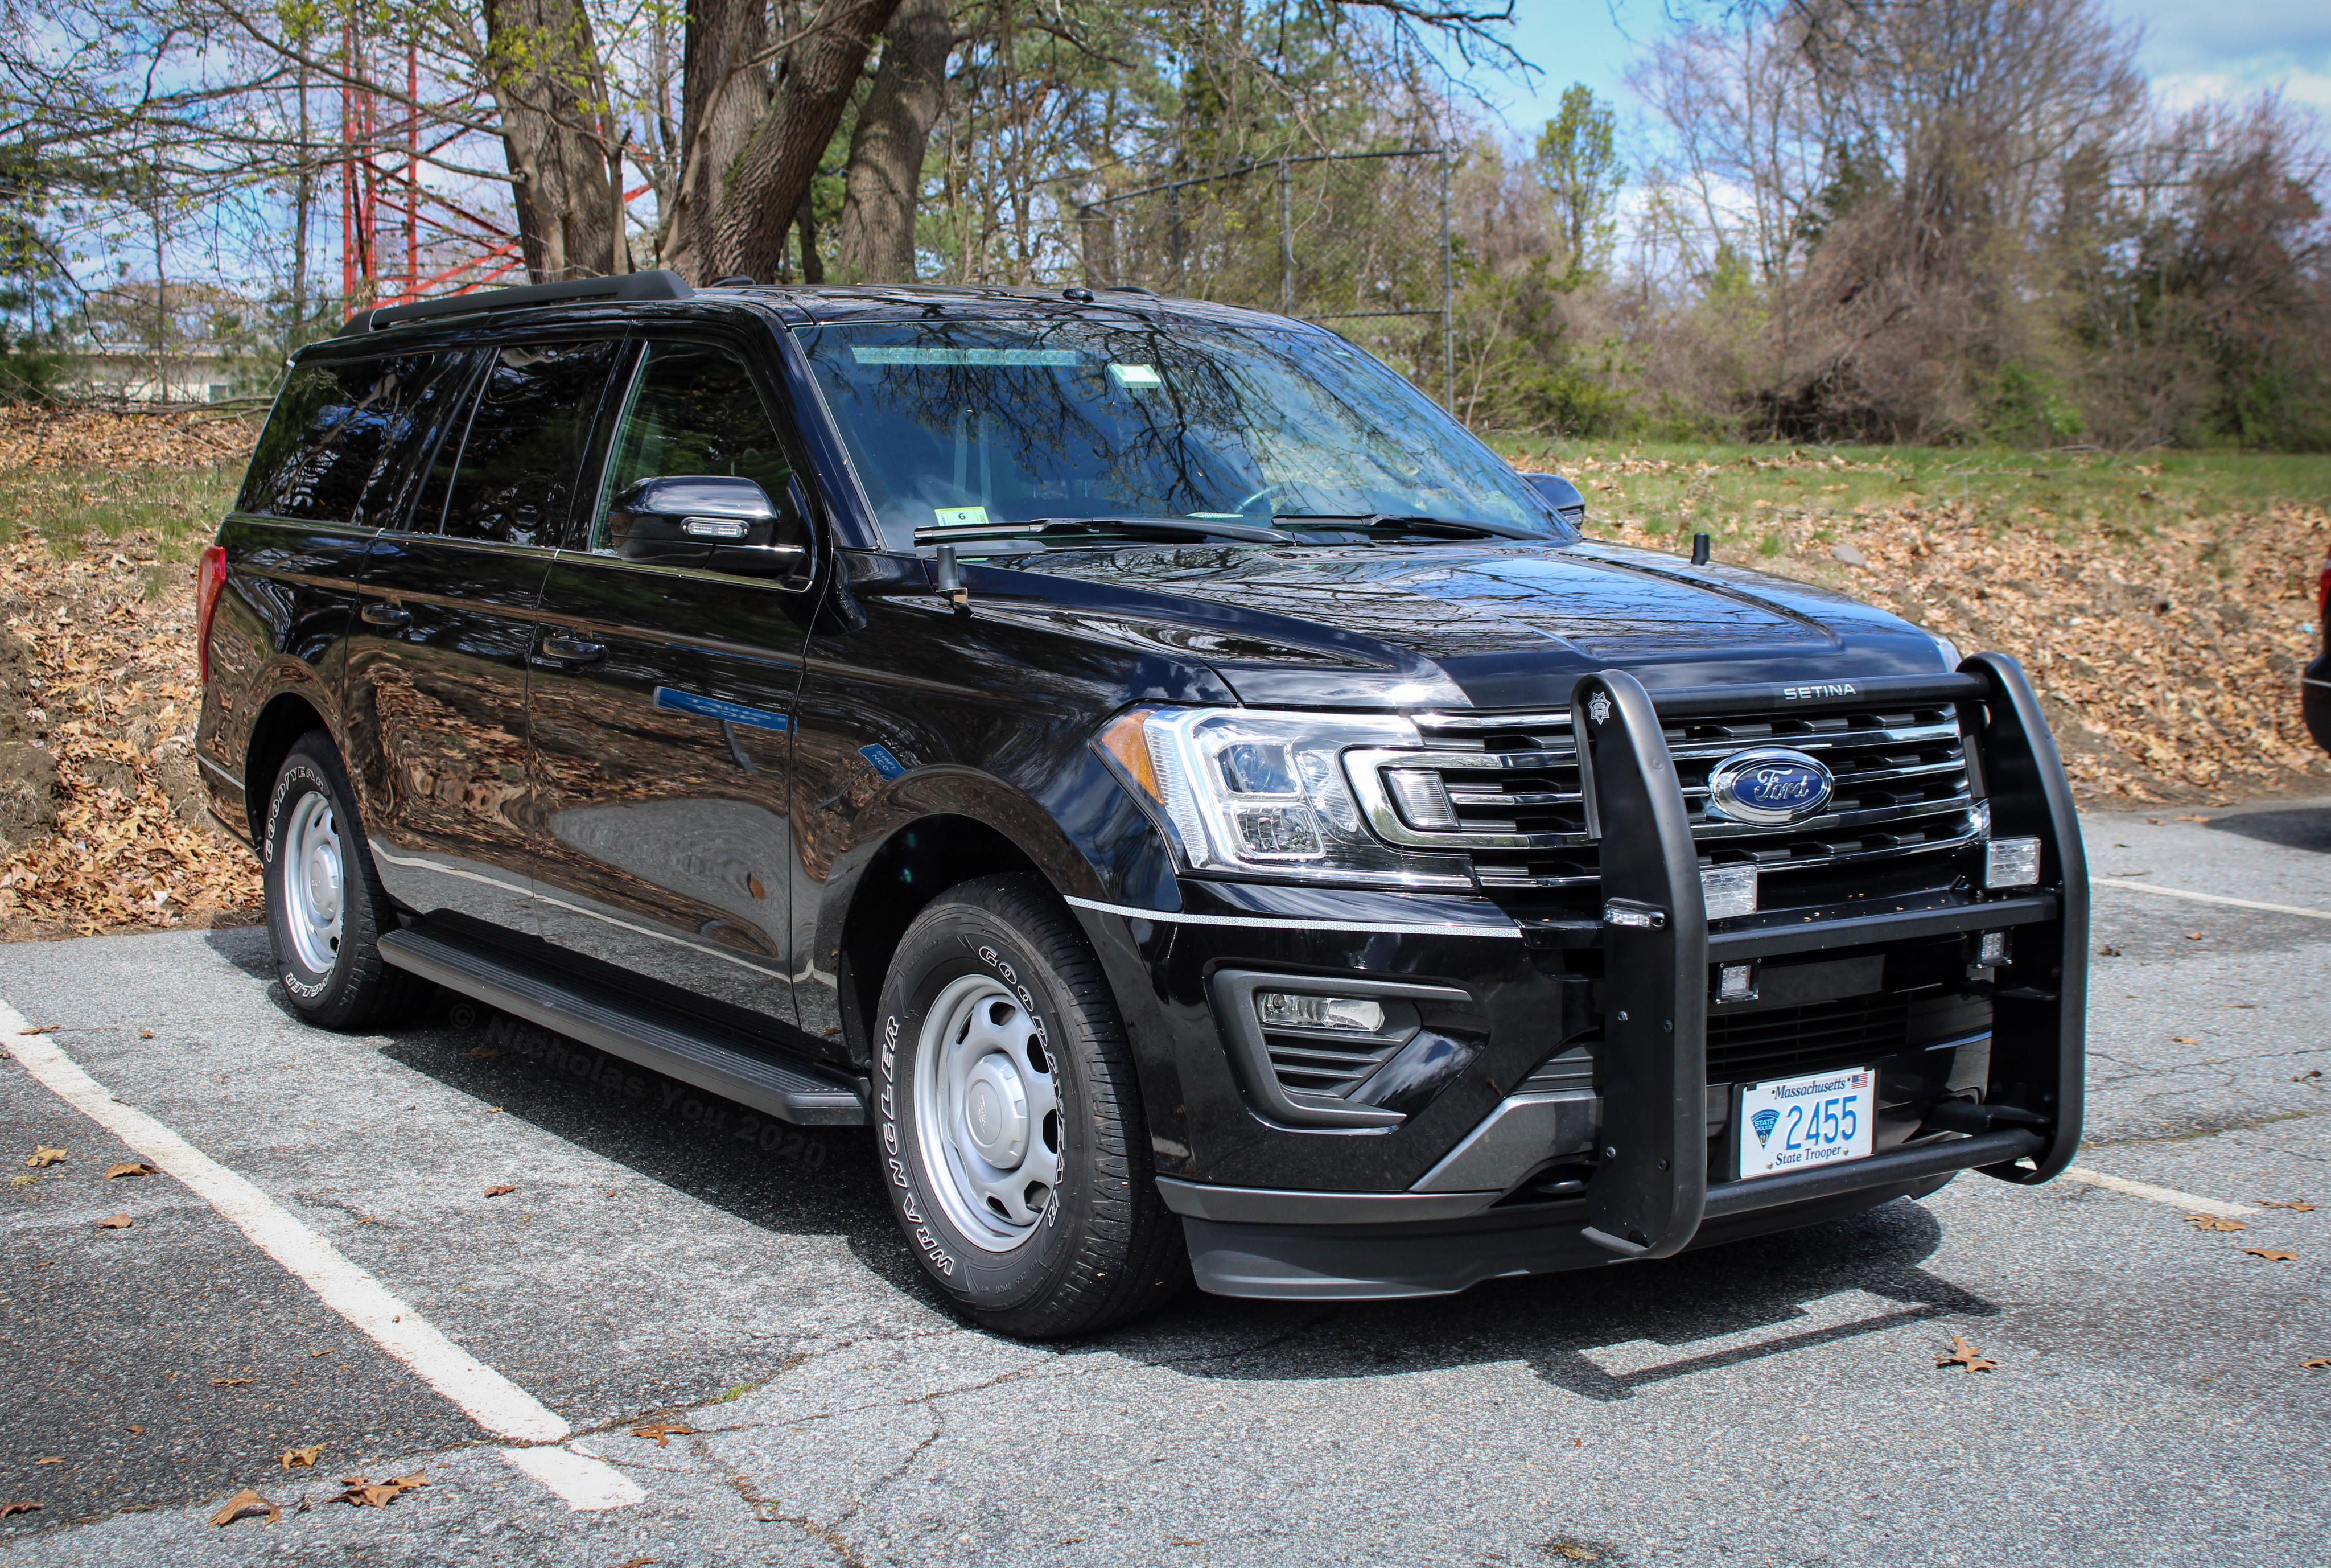 A photo  of Massachusetts State Police
            Cruiser 2455, a 2018 Ford Expedition             taken by Nicholas You